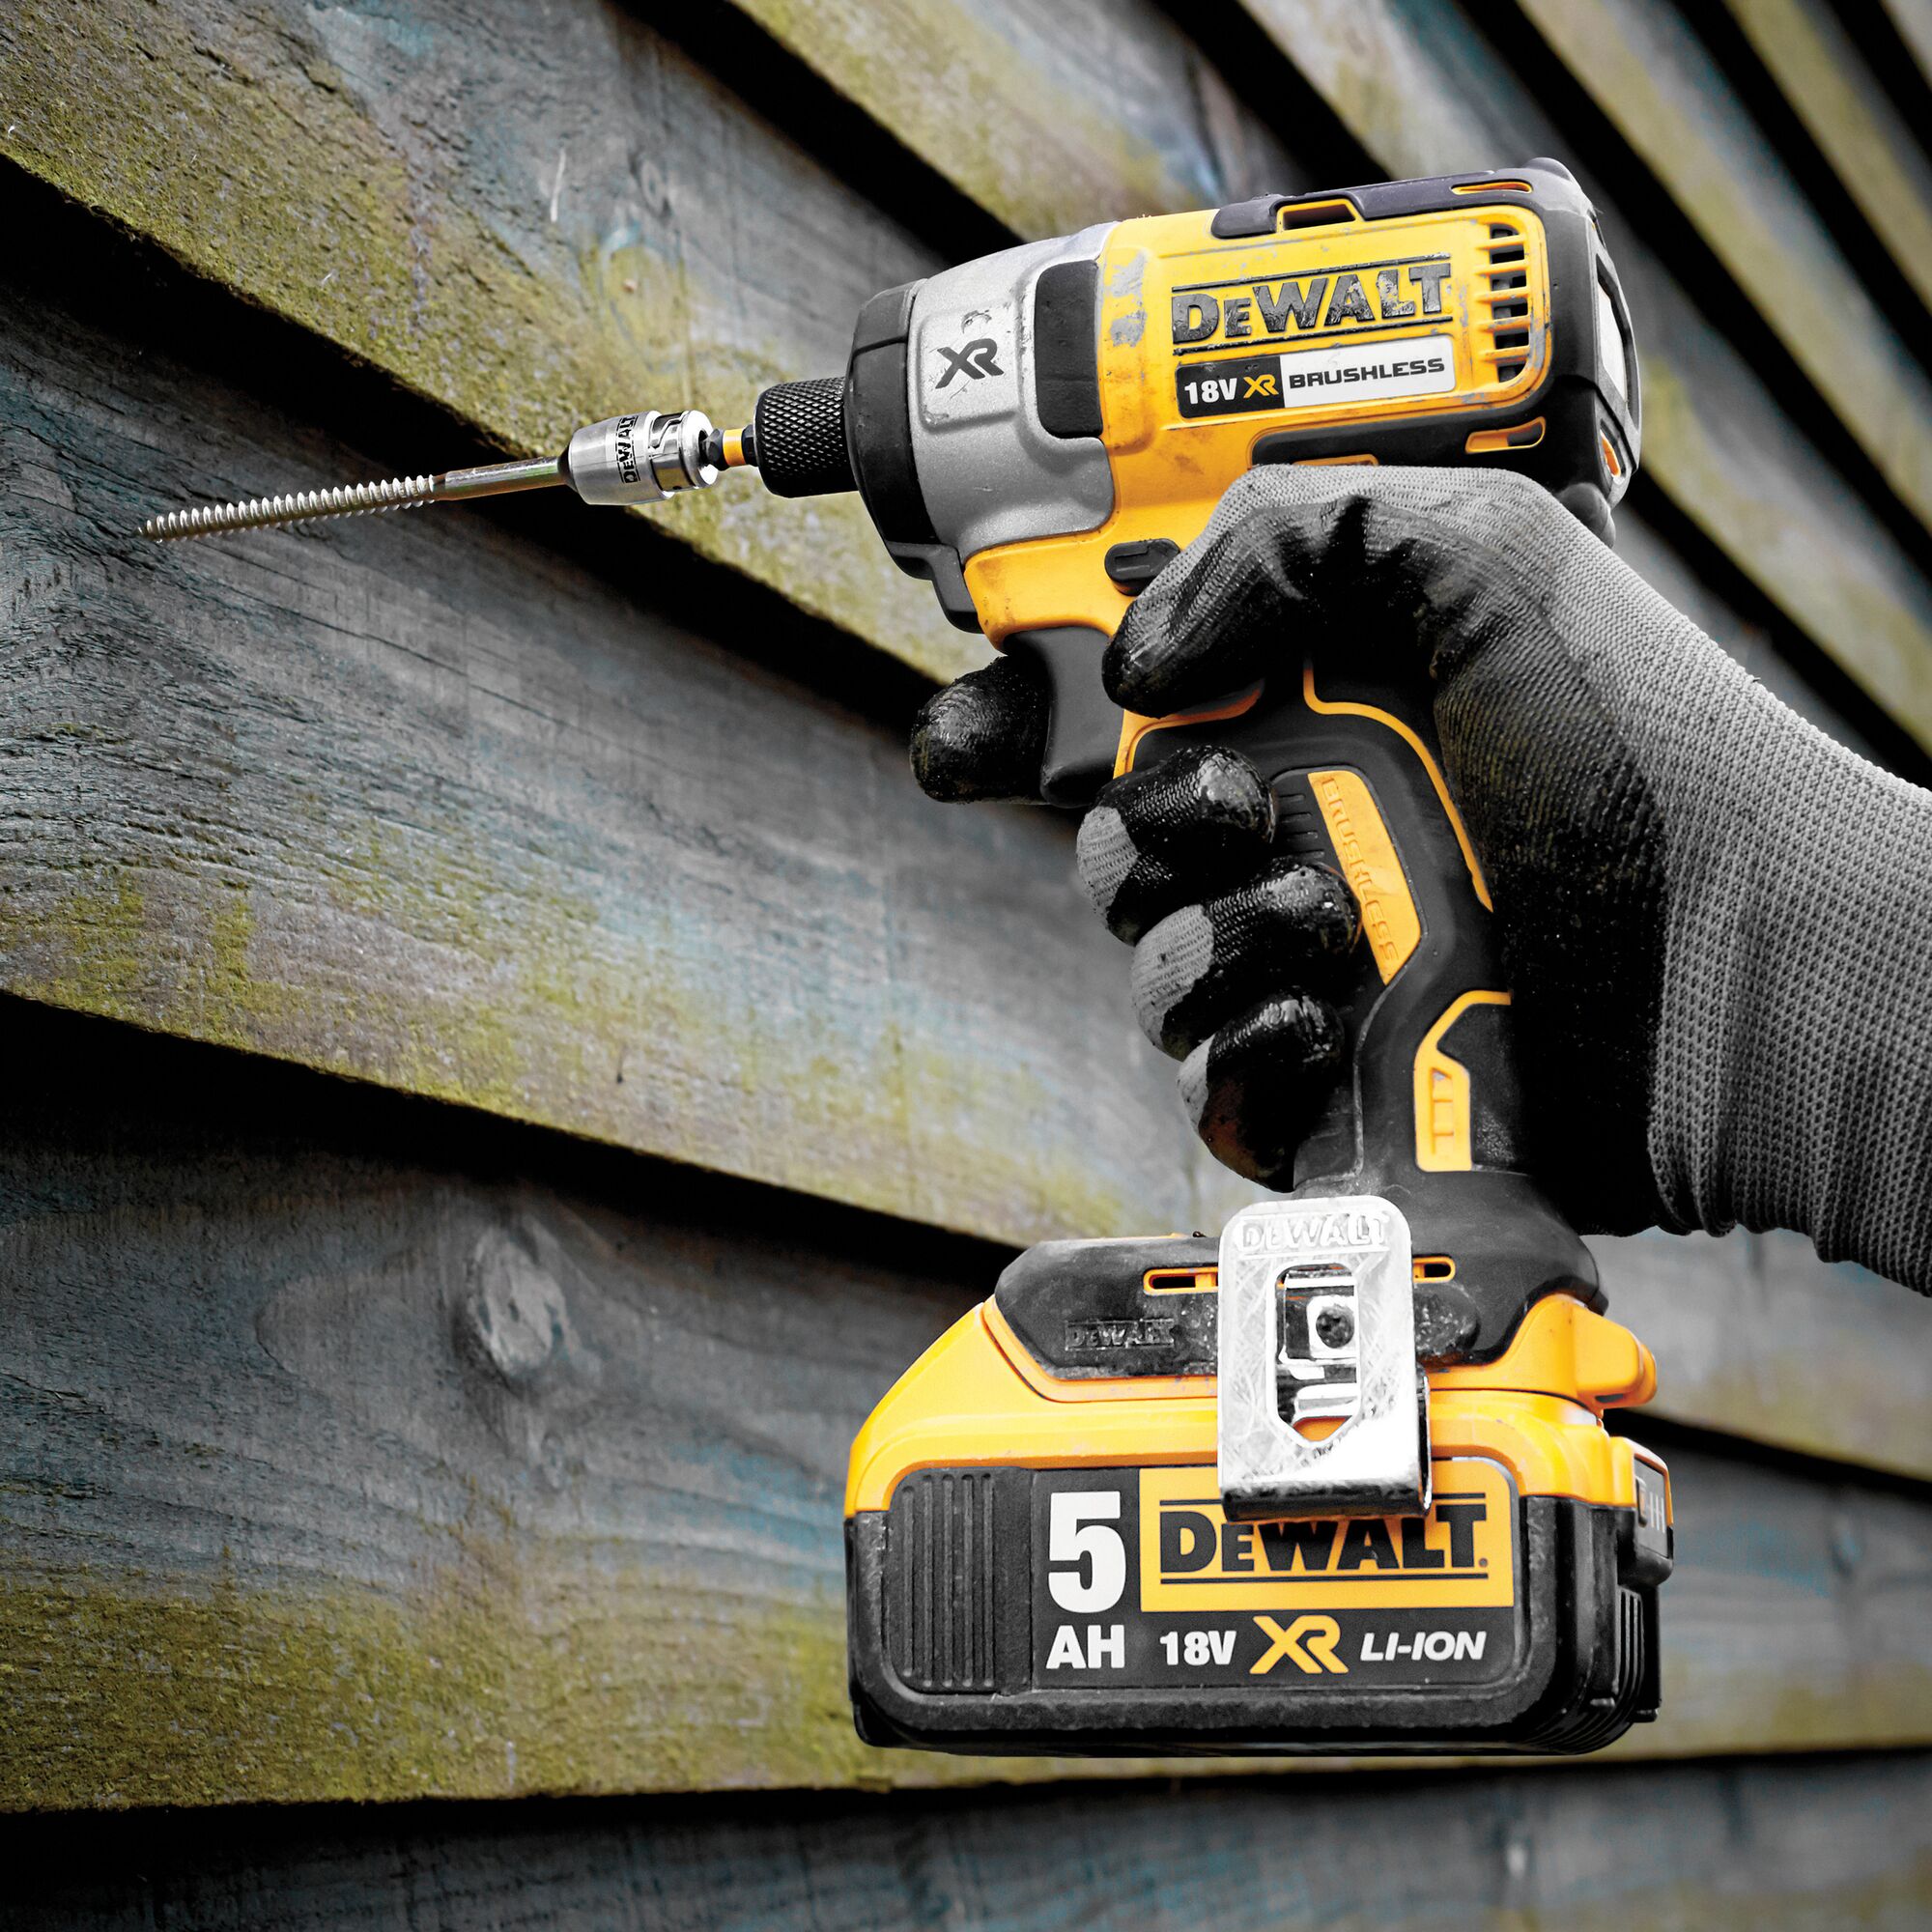 DEWALT 18V IMPACT DRIVER DC7885 BARE UNIT WITH FREE DEWALT IMPACT READY TORSION PIVOTING DT7505 FOR ACCESSING TIGHT SPACES AND AWKWARD SCREWS 